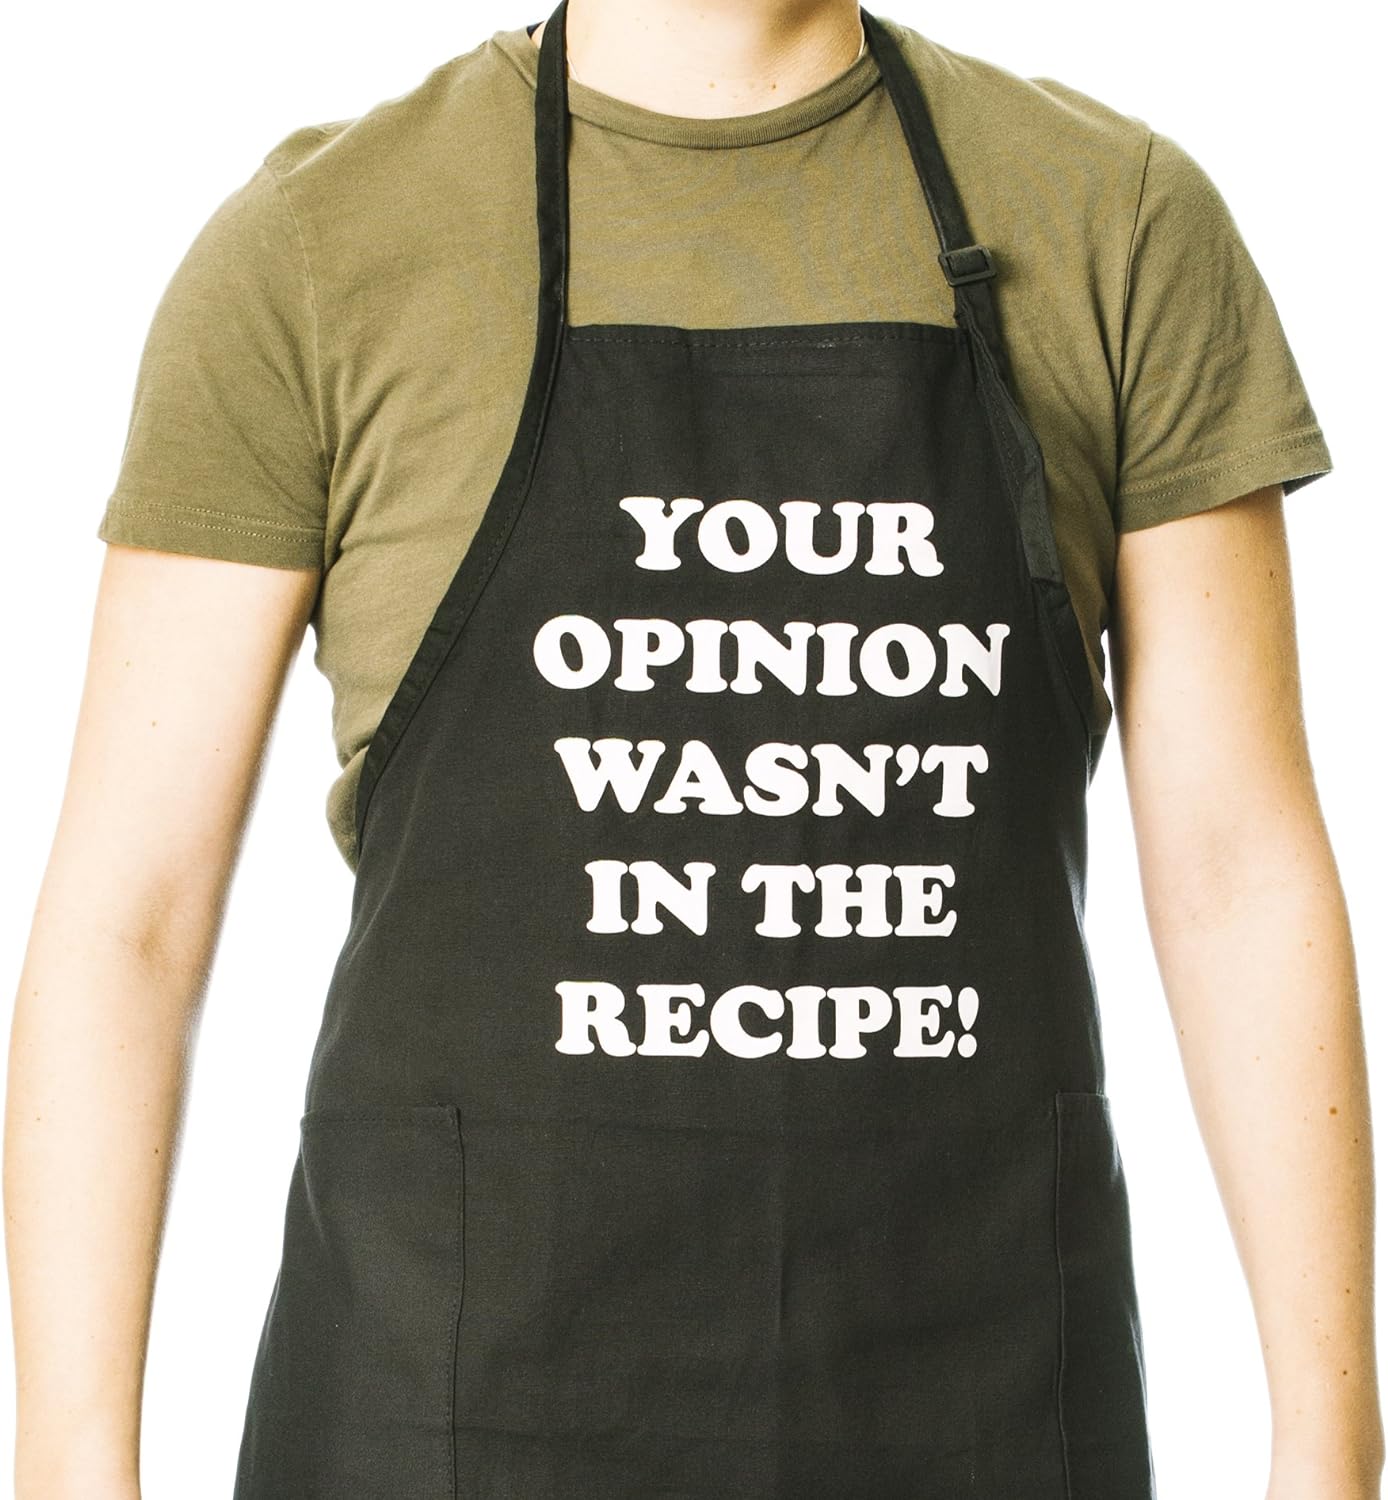 Funny Guy Mugs Pizza Kitchen Apron with Pockets